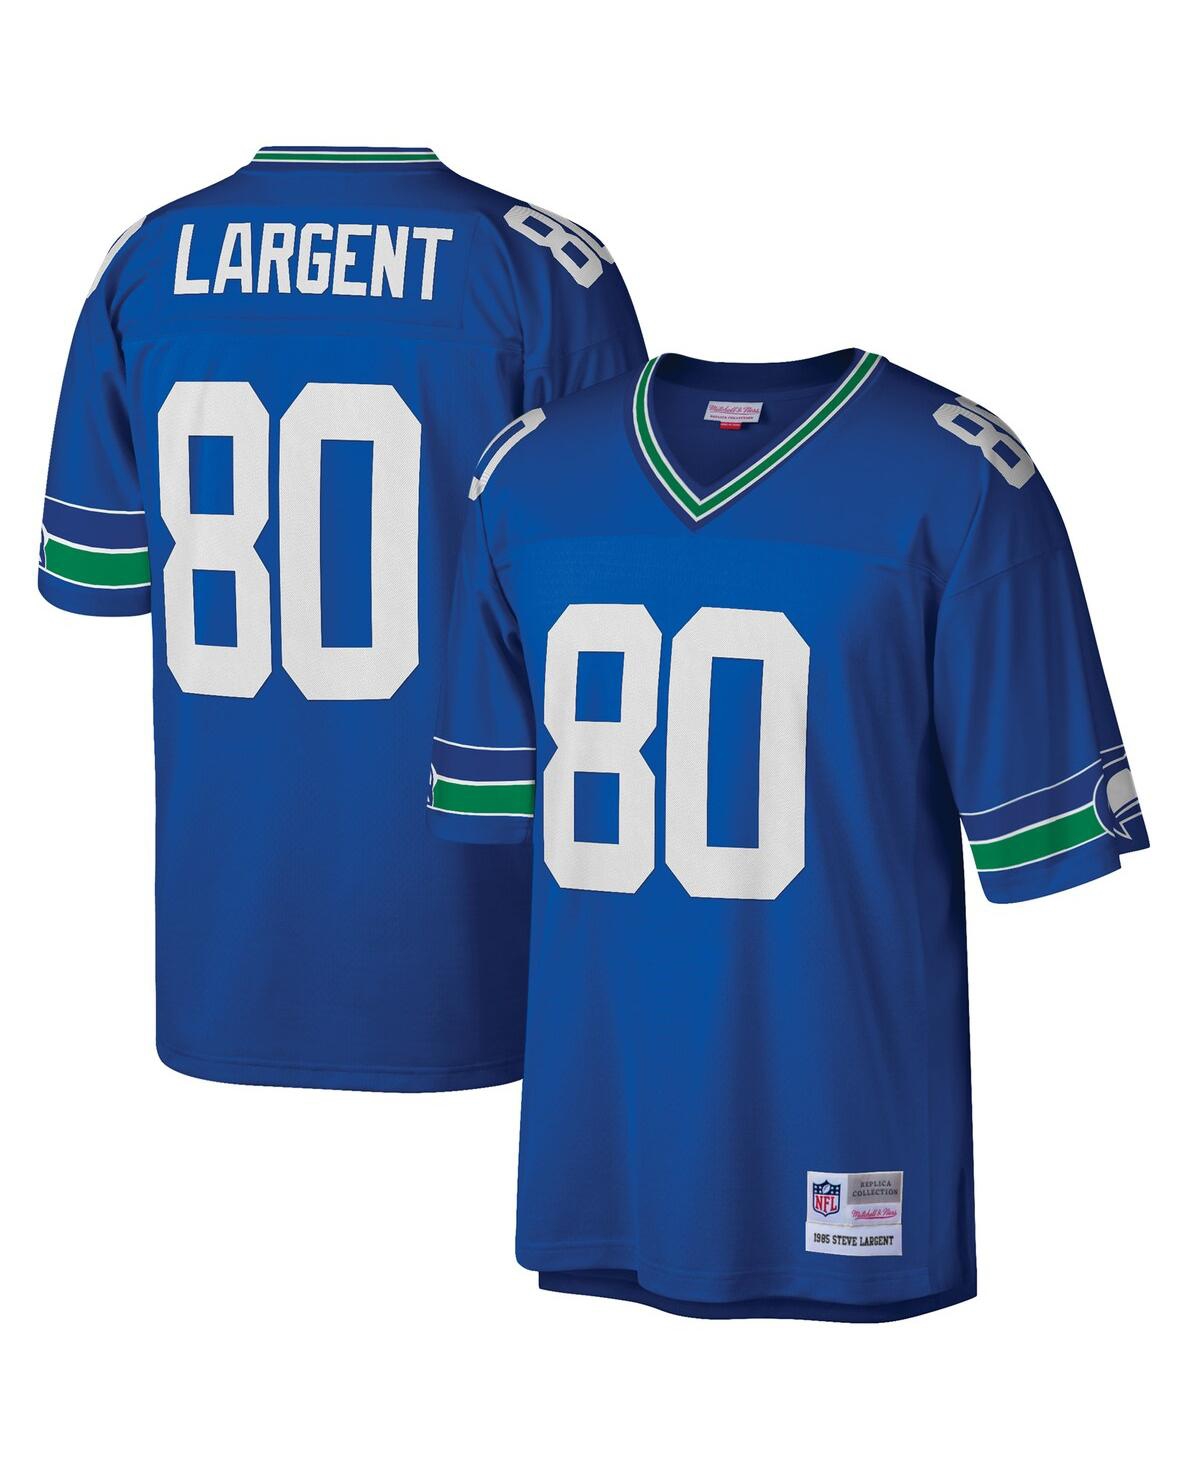 Men's Mitchell & Ness Steve Largent Royal Seattle Seahawks Big & Tall 1985 Retired Player Replica Jersey - Royal